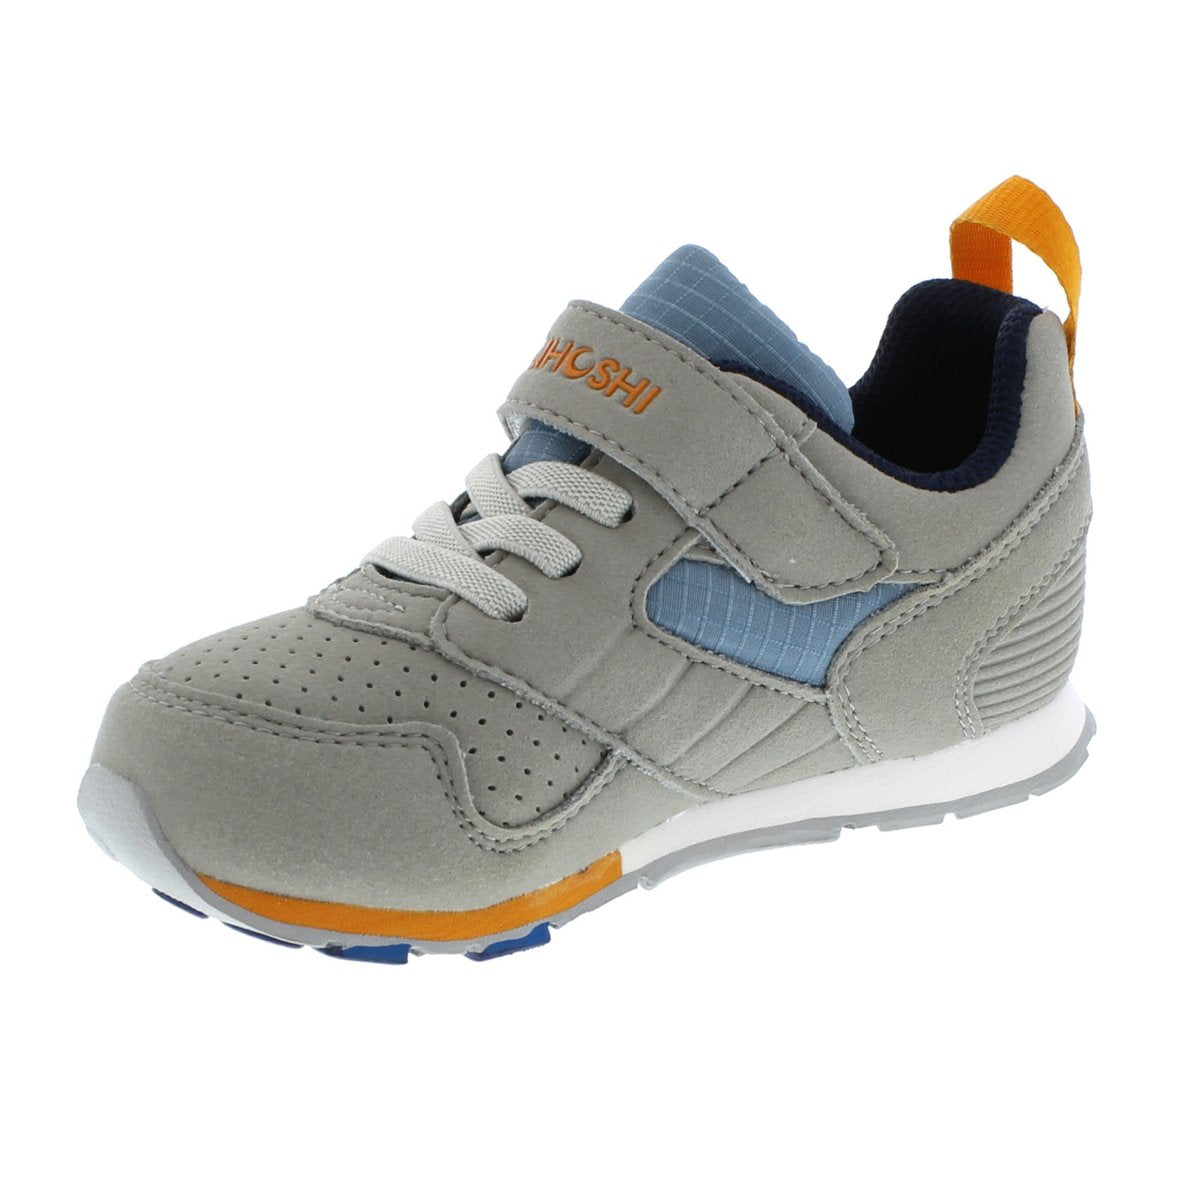 Child Tsukihoshi Racer Sneaker in Gray/Sea from the front view